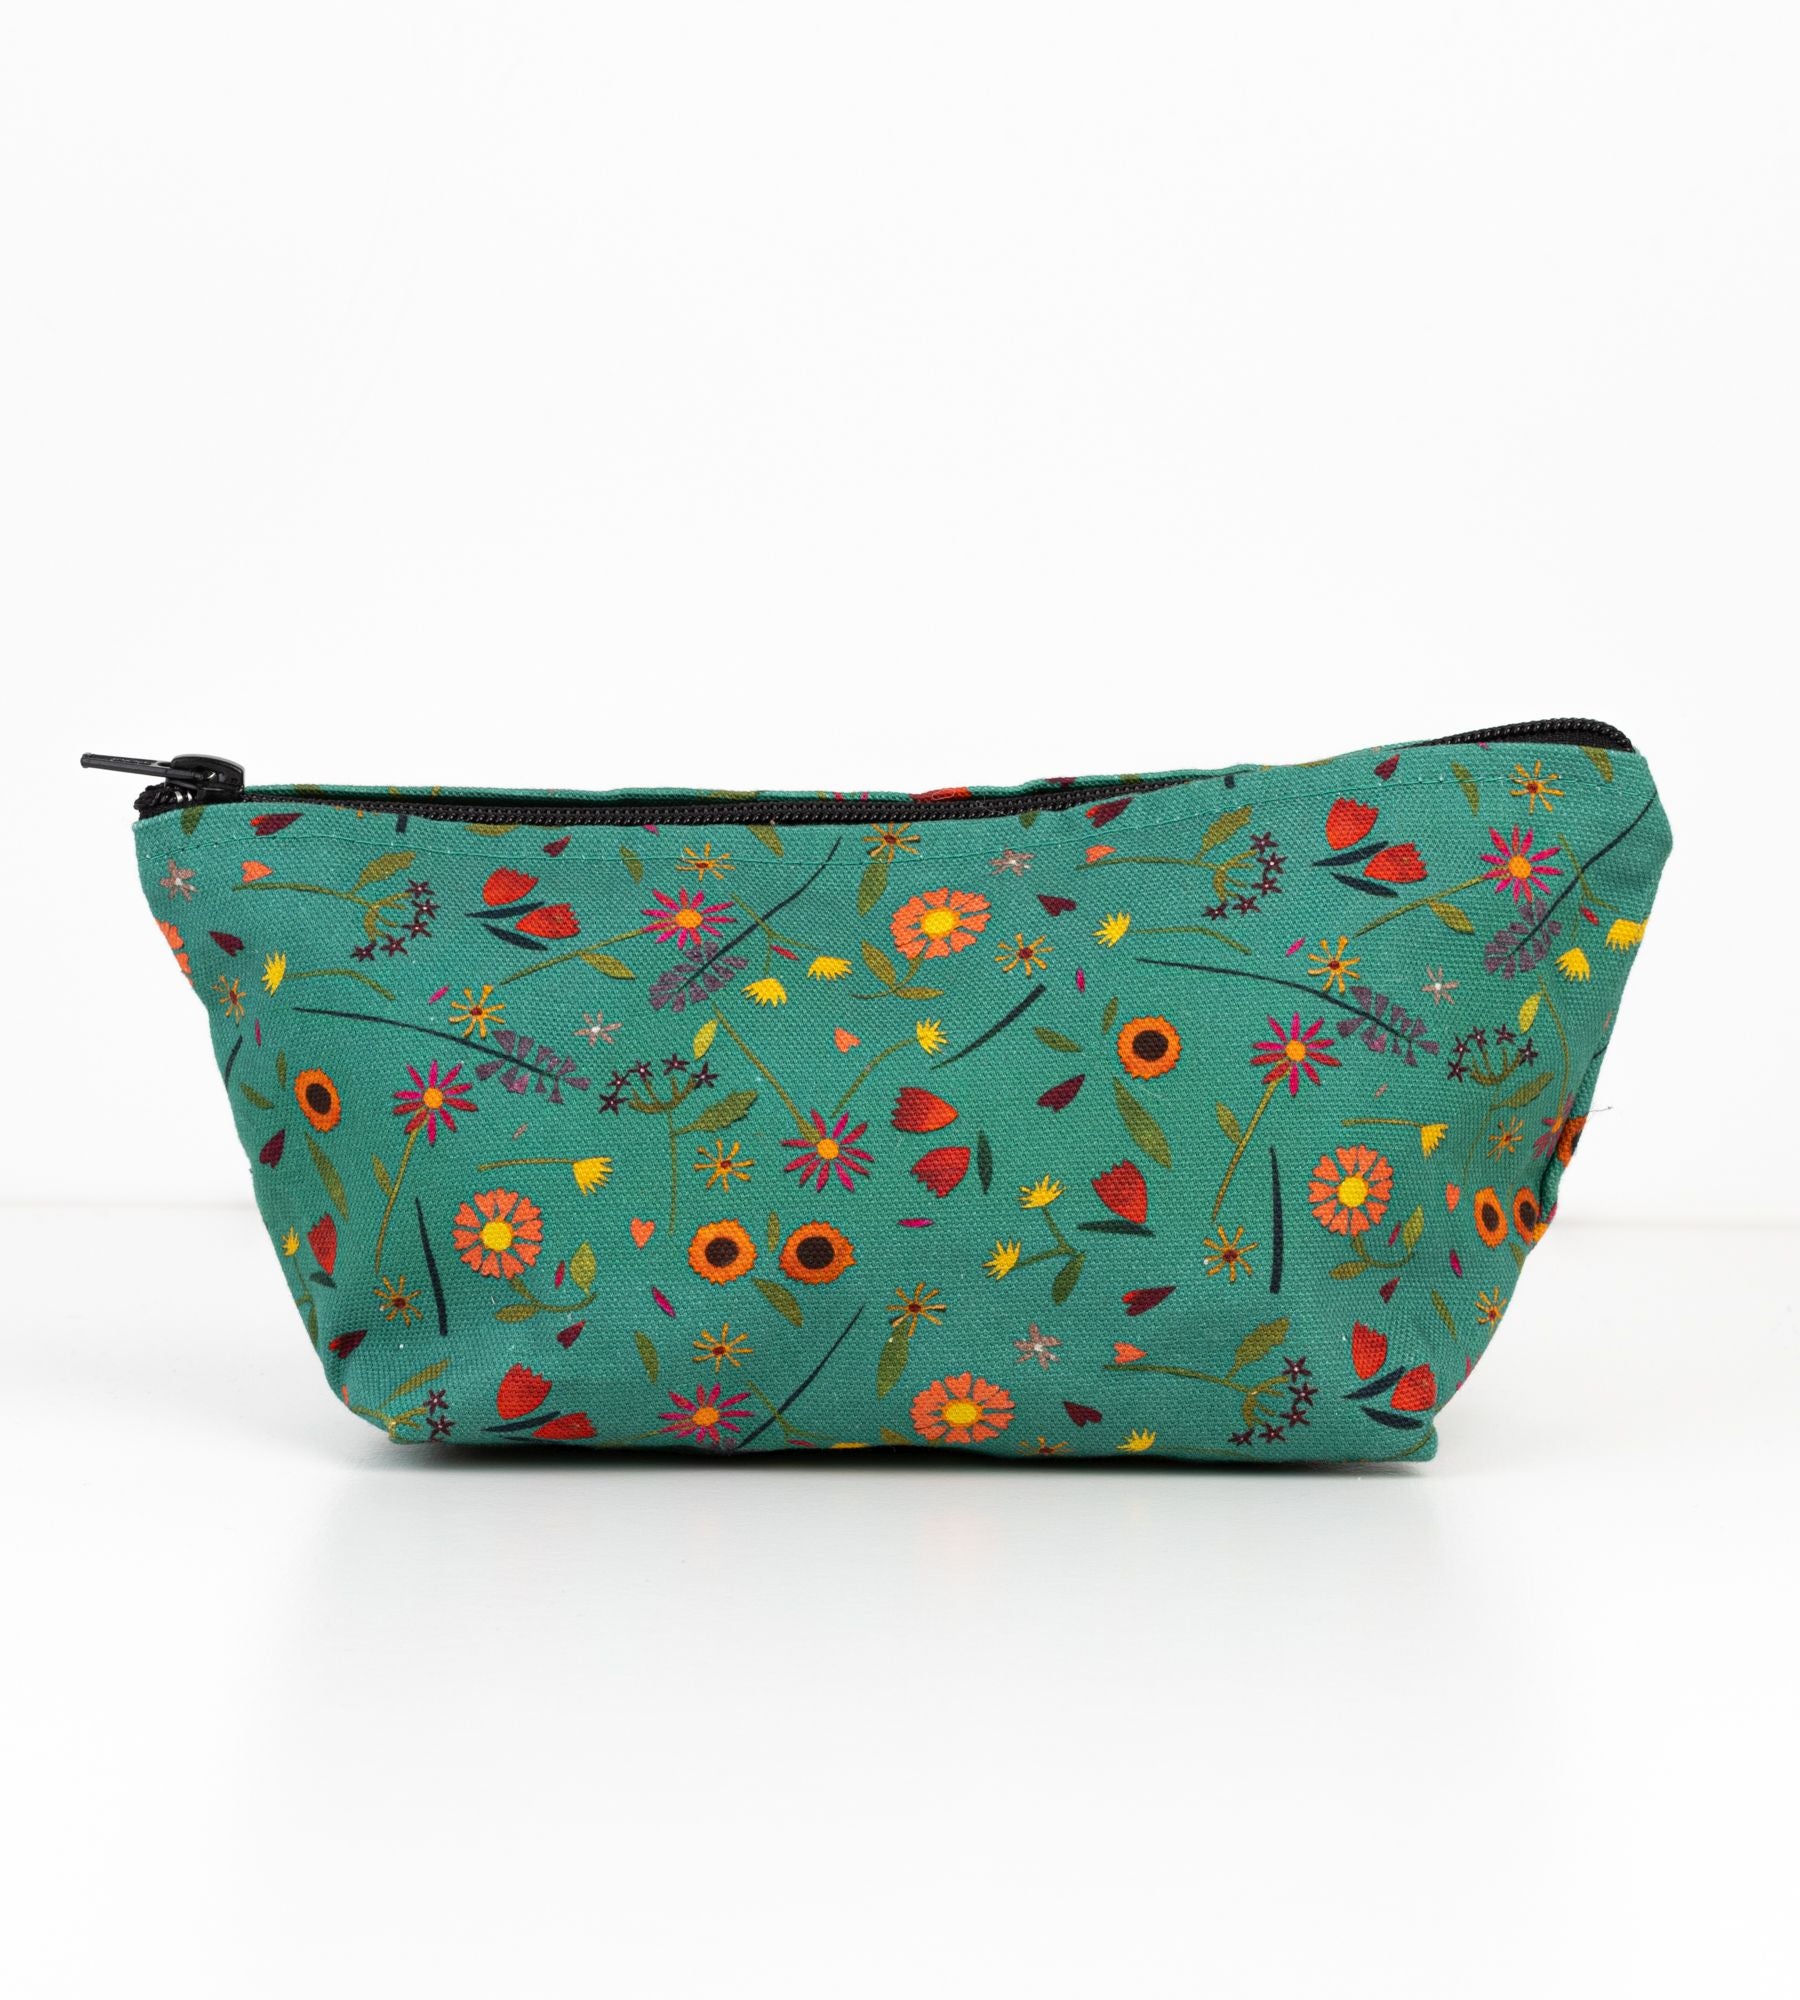 Canvas zipped bag 'Flowers' by Lizzie Spikes